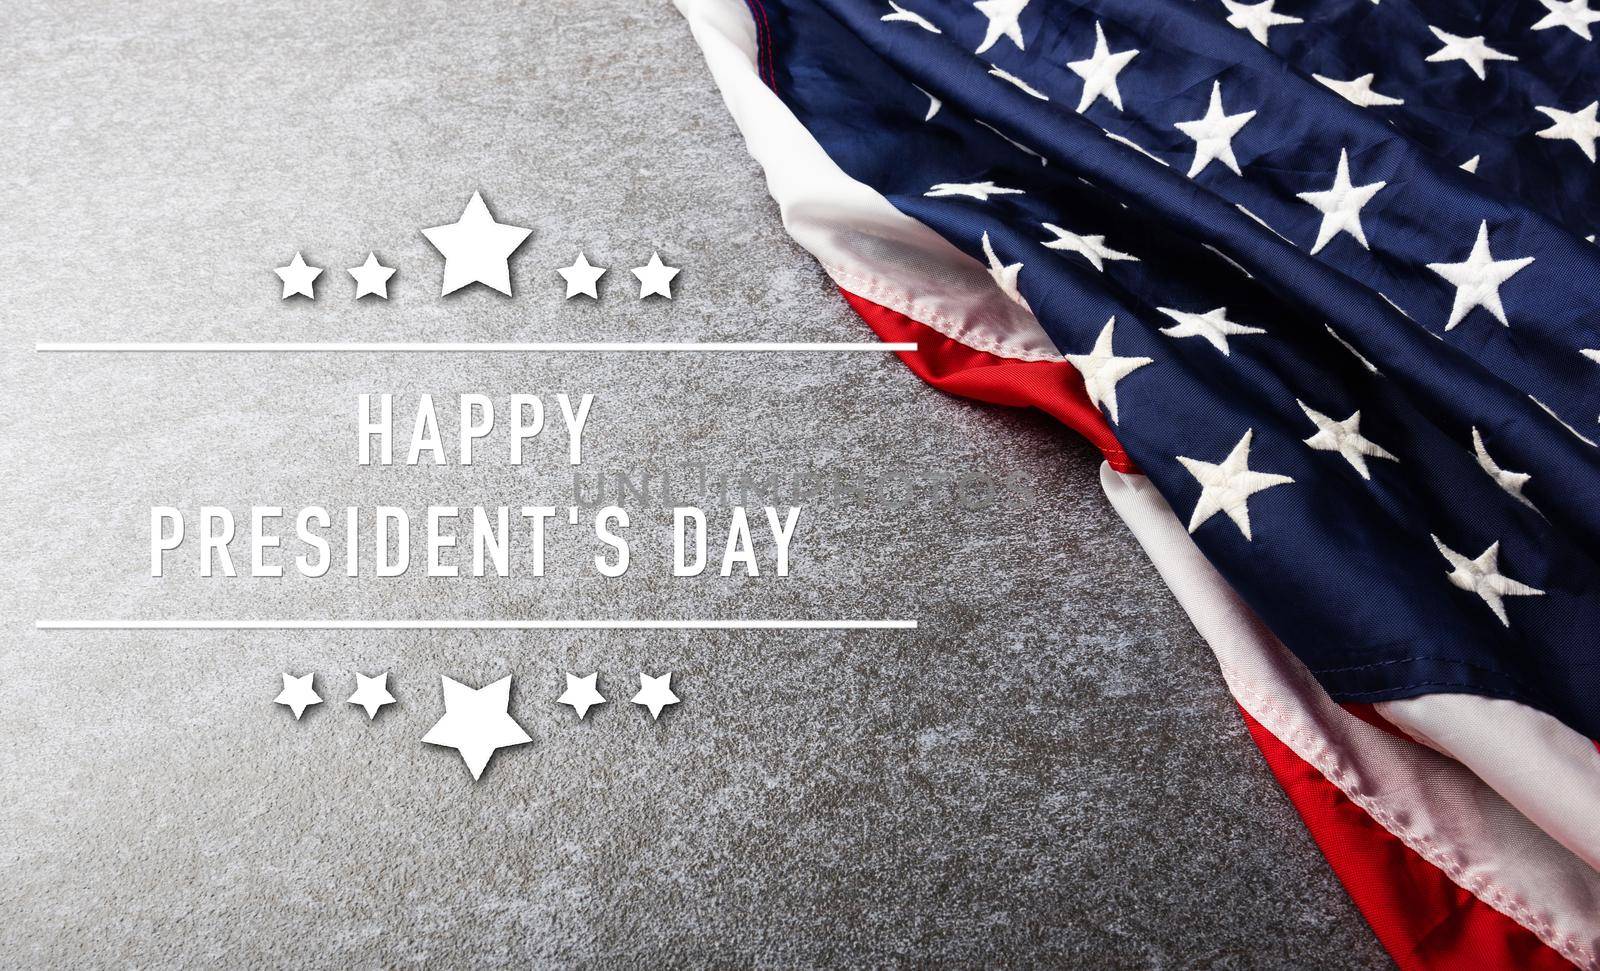 United States National Holidays. American or USA Flag with "HAPPY PRESIDENT'S DAY" text on cement background, President Day concept